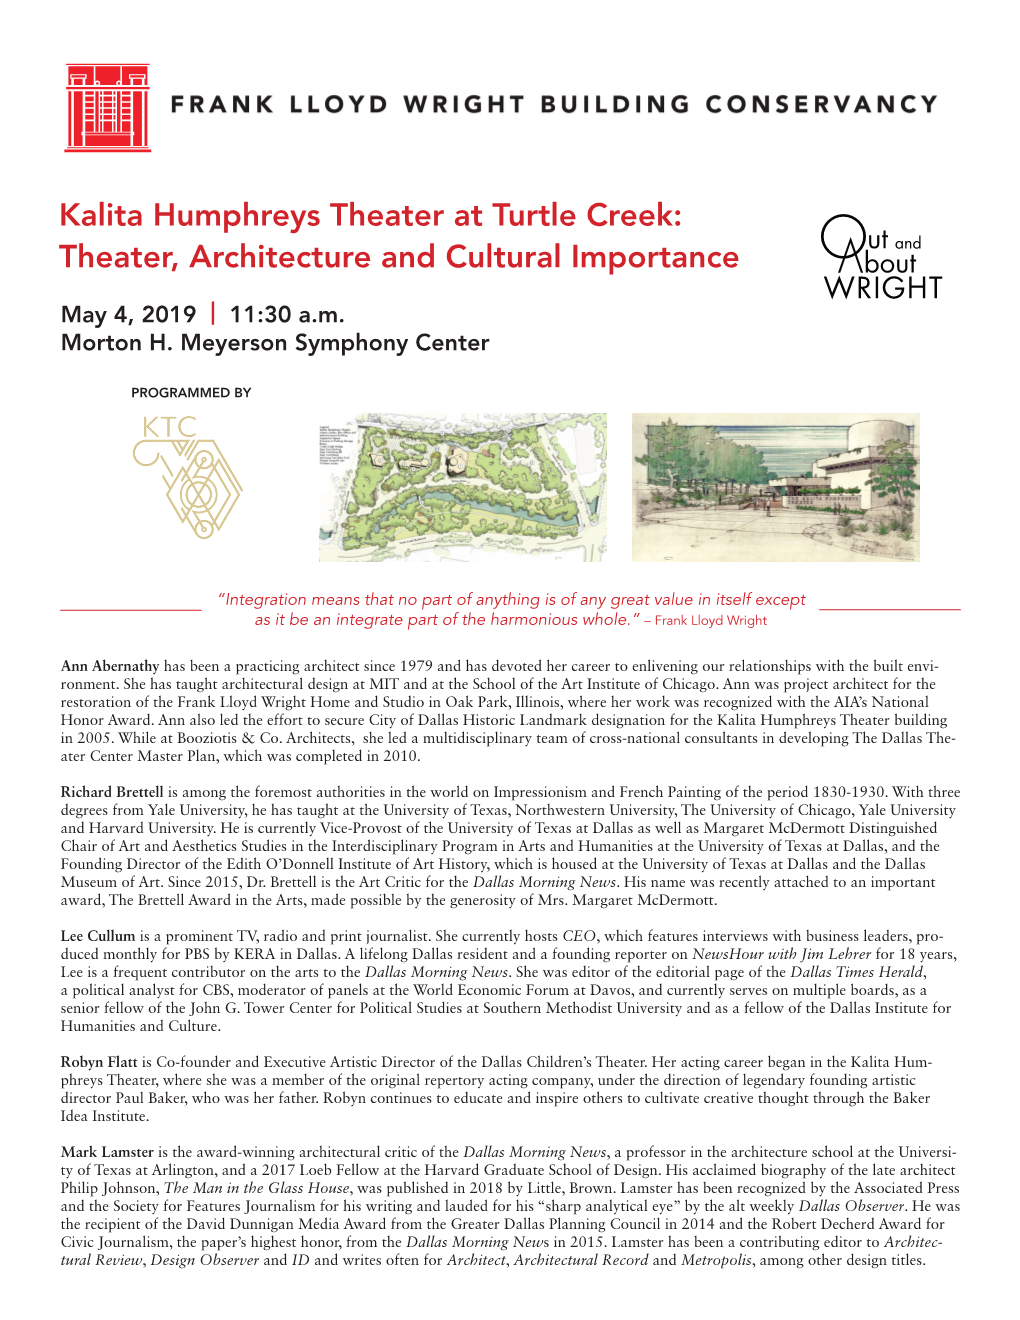 Kalita Humphreys Theater at Turtle Creek: Theater, Architecture and Cultural Importance